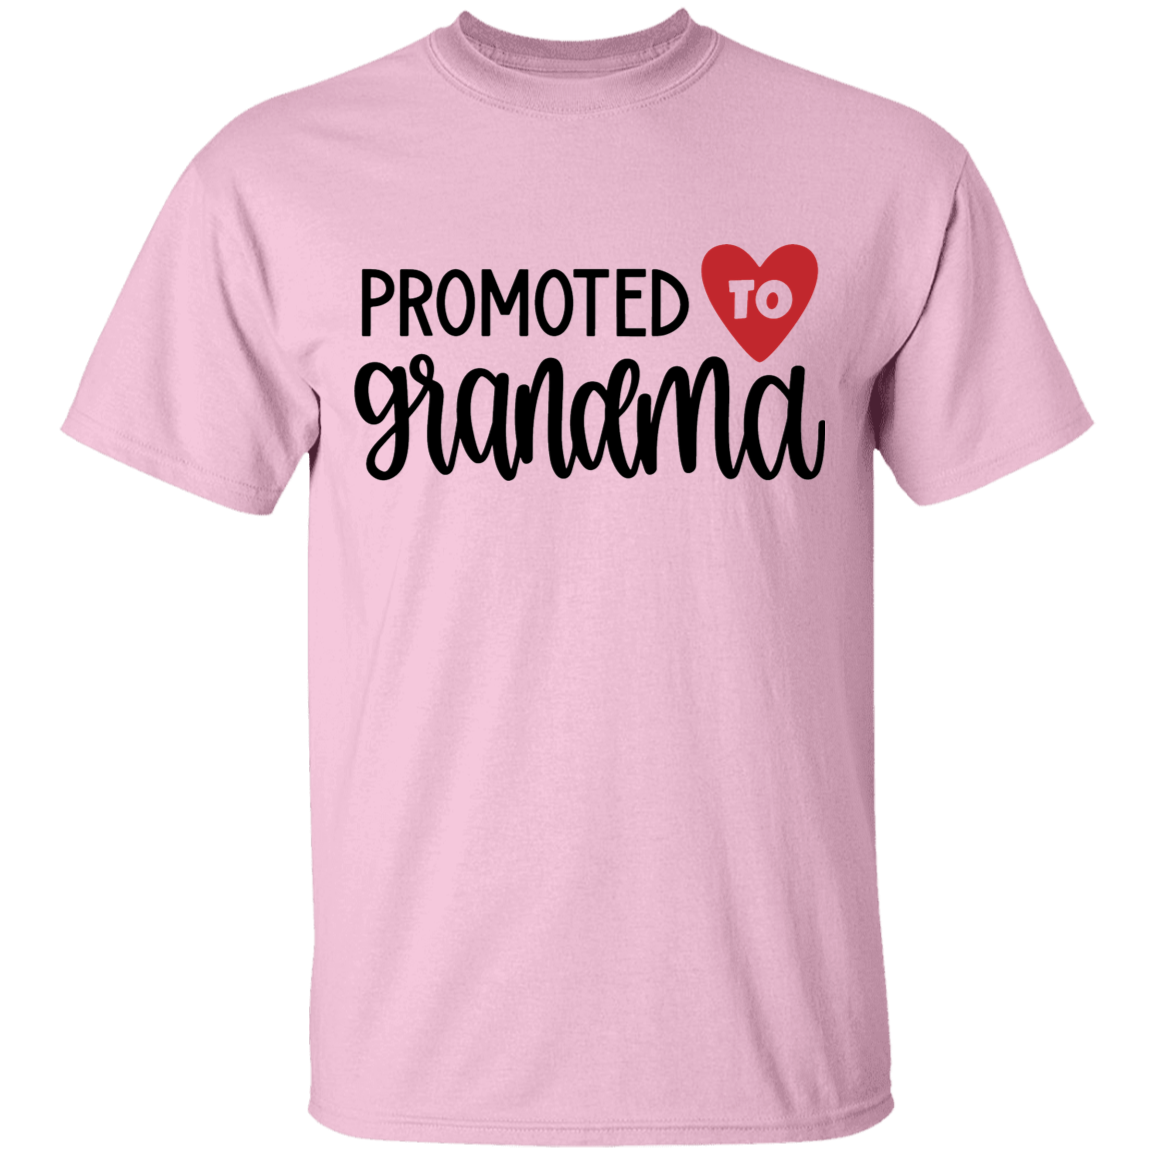 Promoted to grandma adult T'shirt